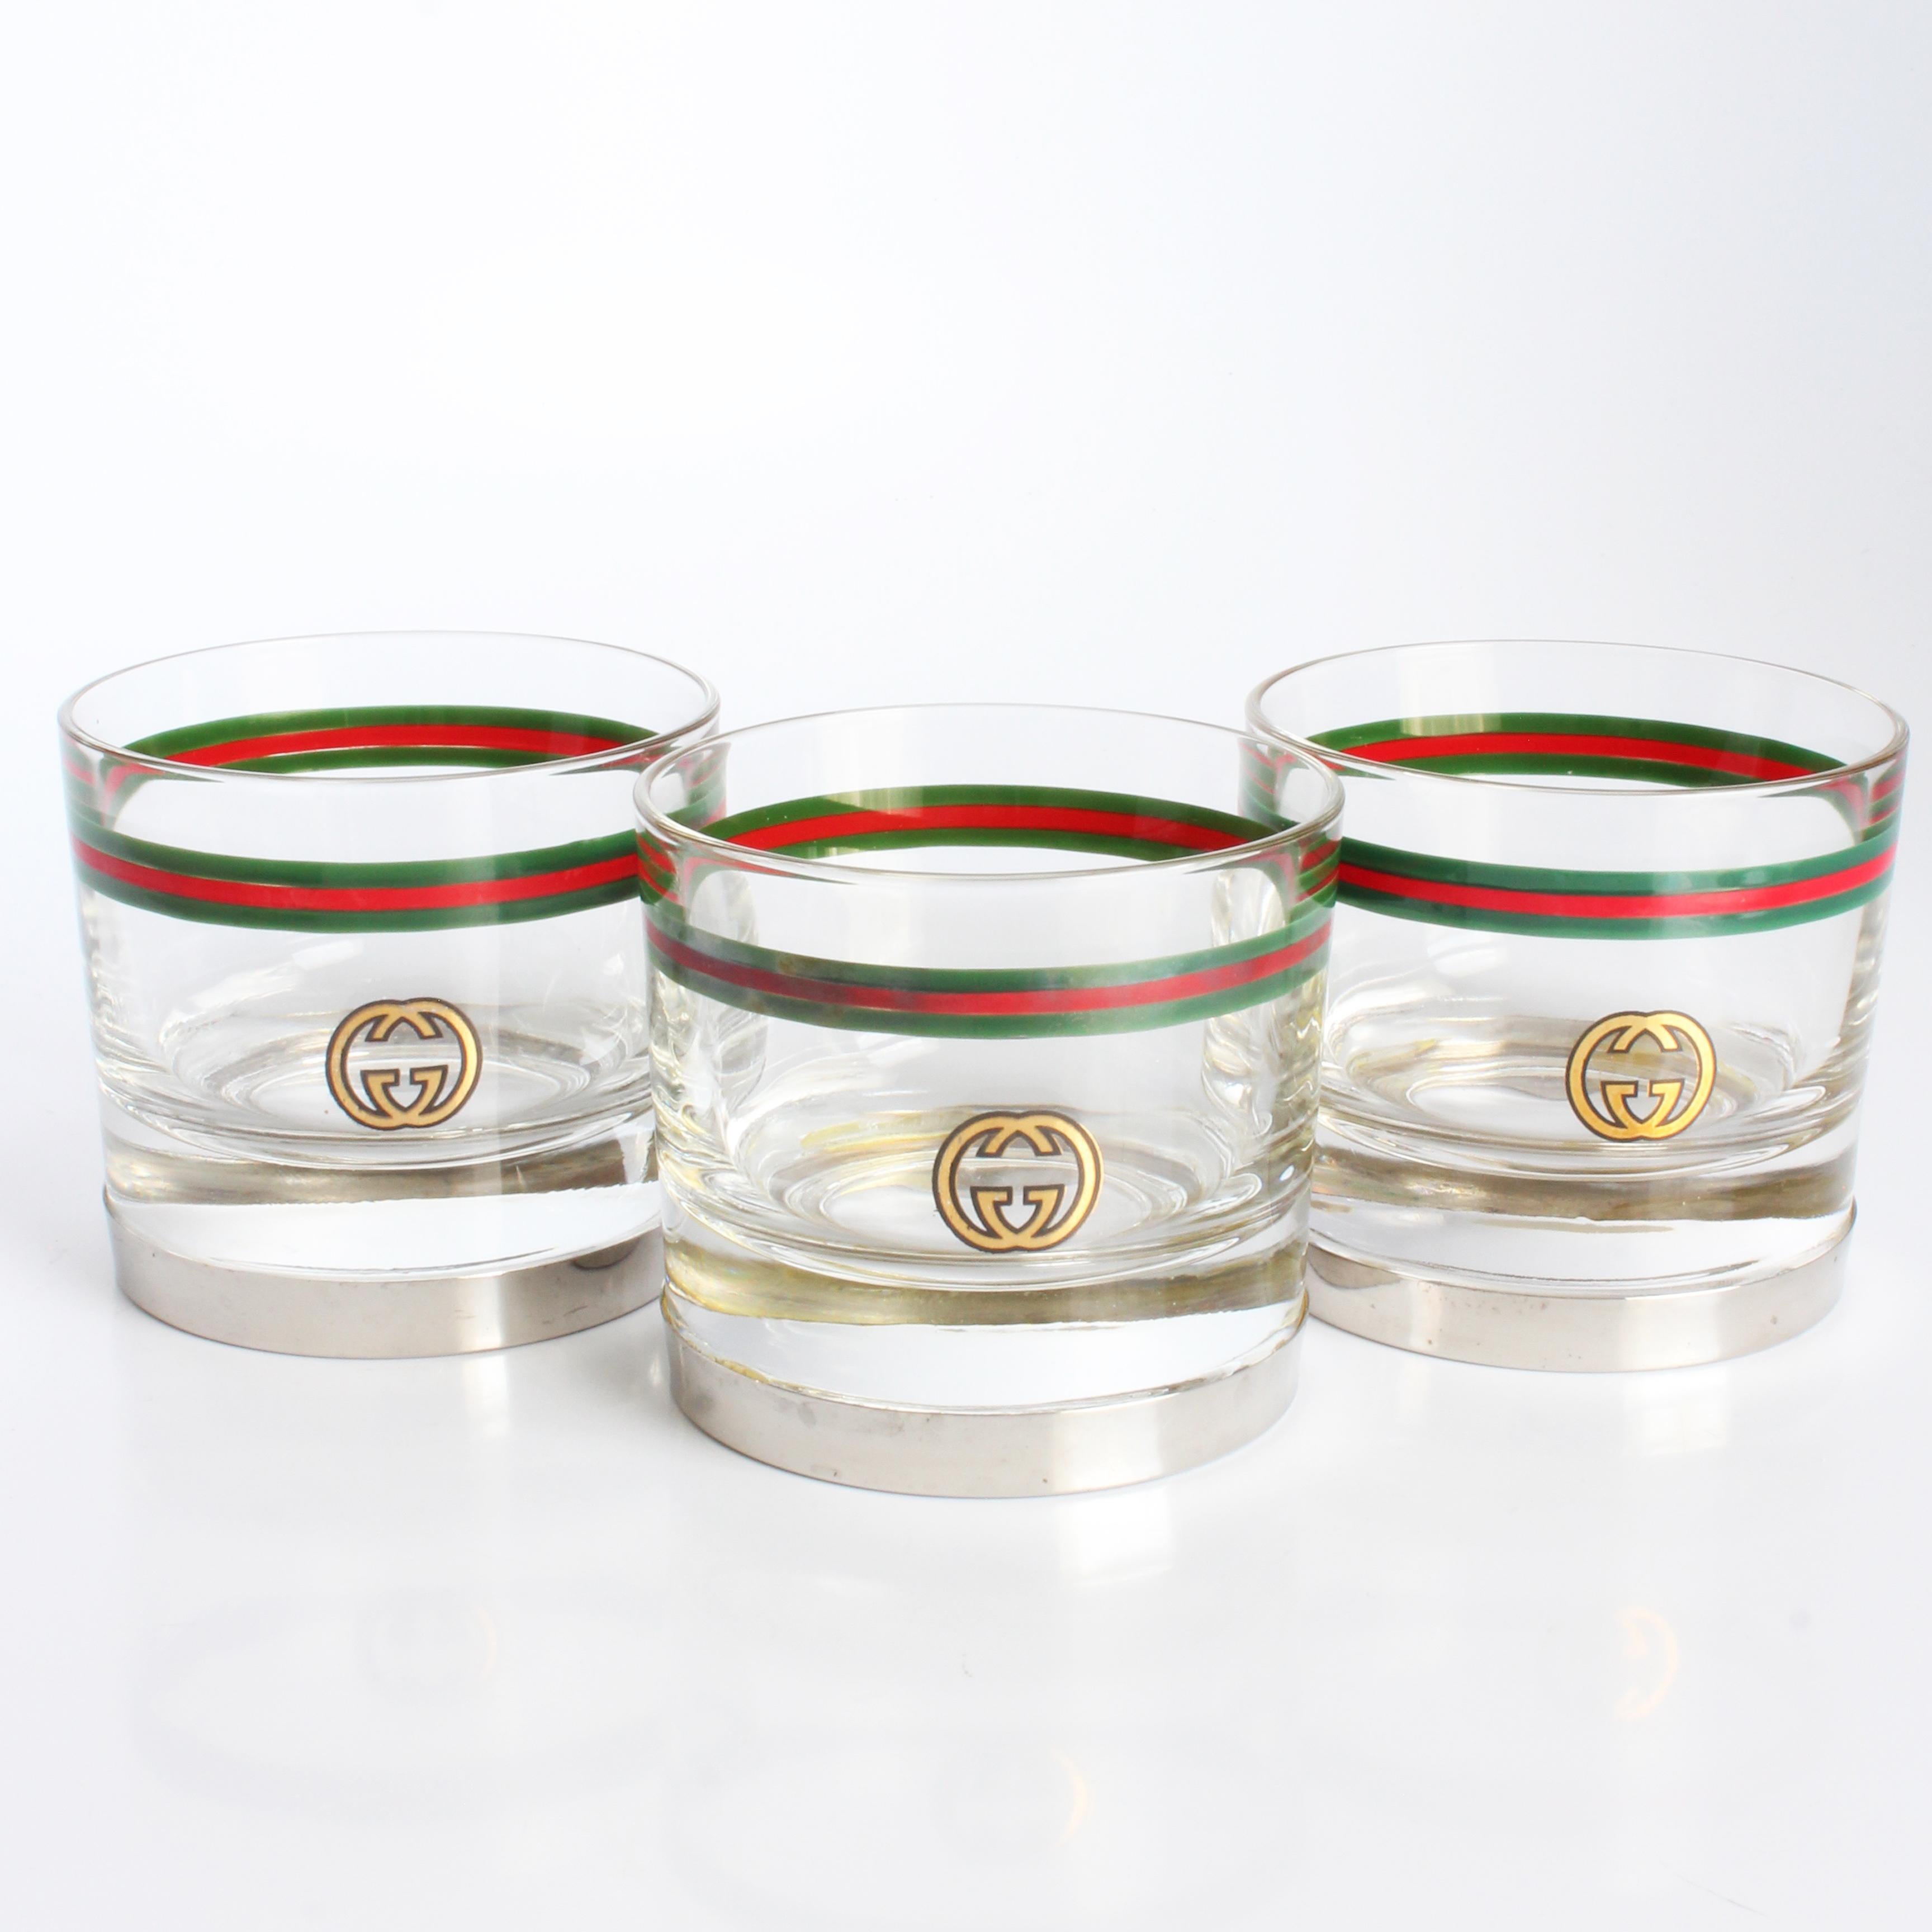 Gucci Cocktail Glasses with Silver Base GG Logo Webbing 3pc Set Barware Vintage In Good Condition For Sale In Port Saint Lucie, FL